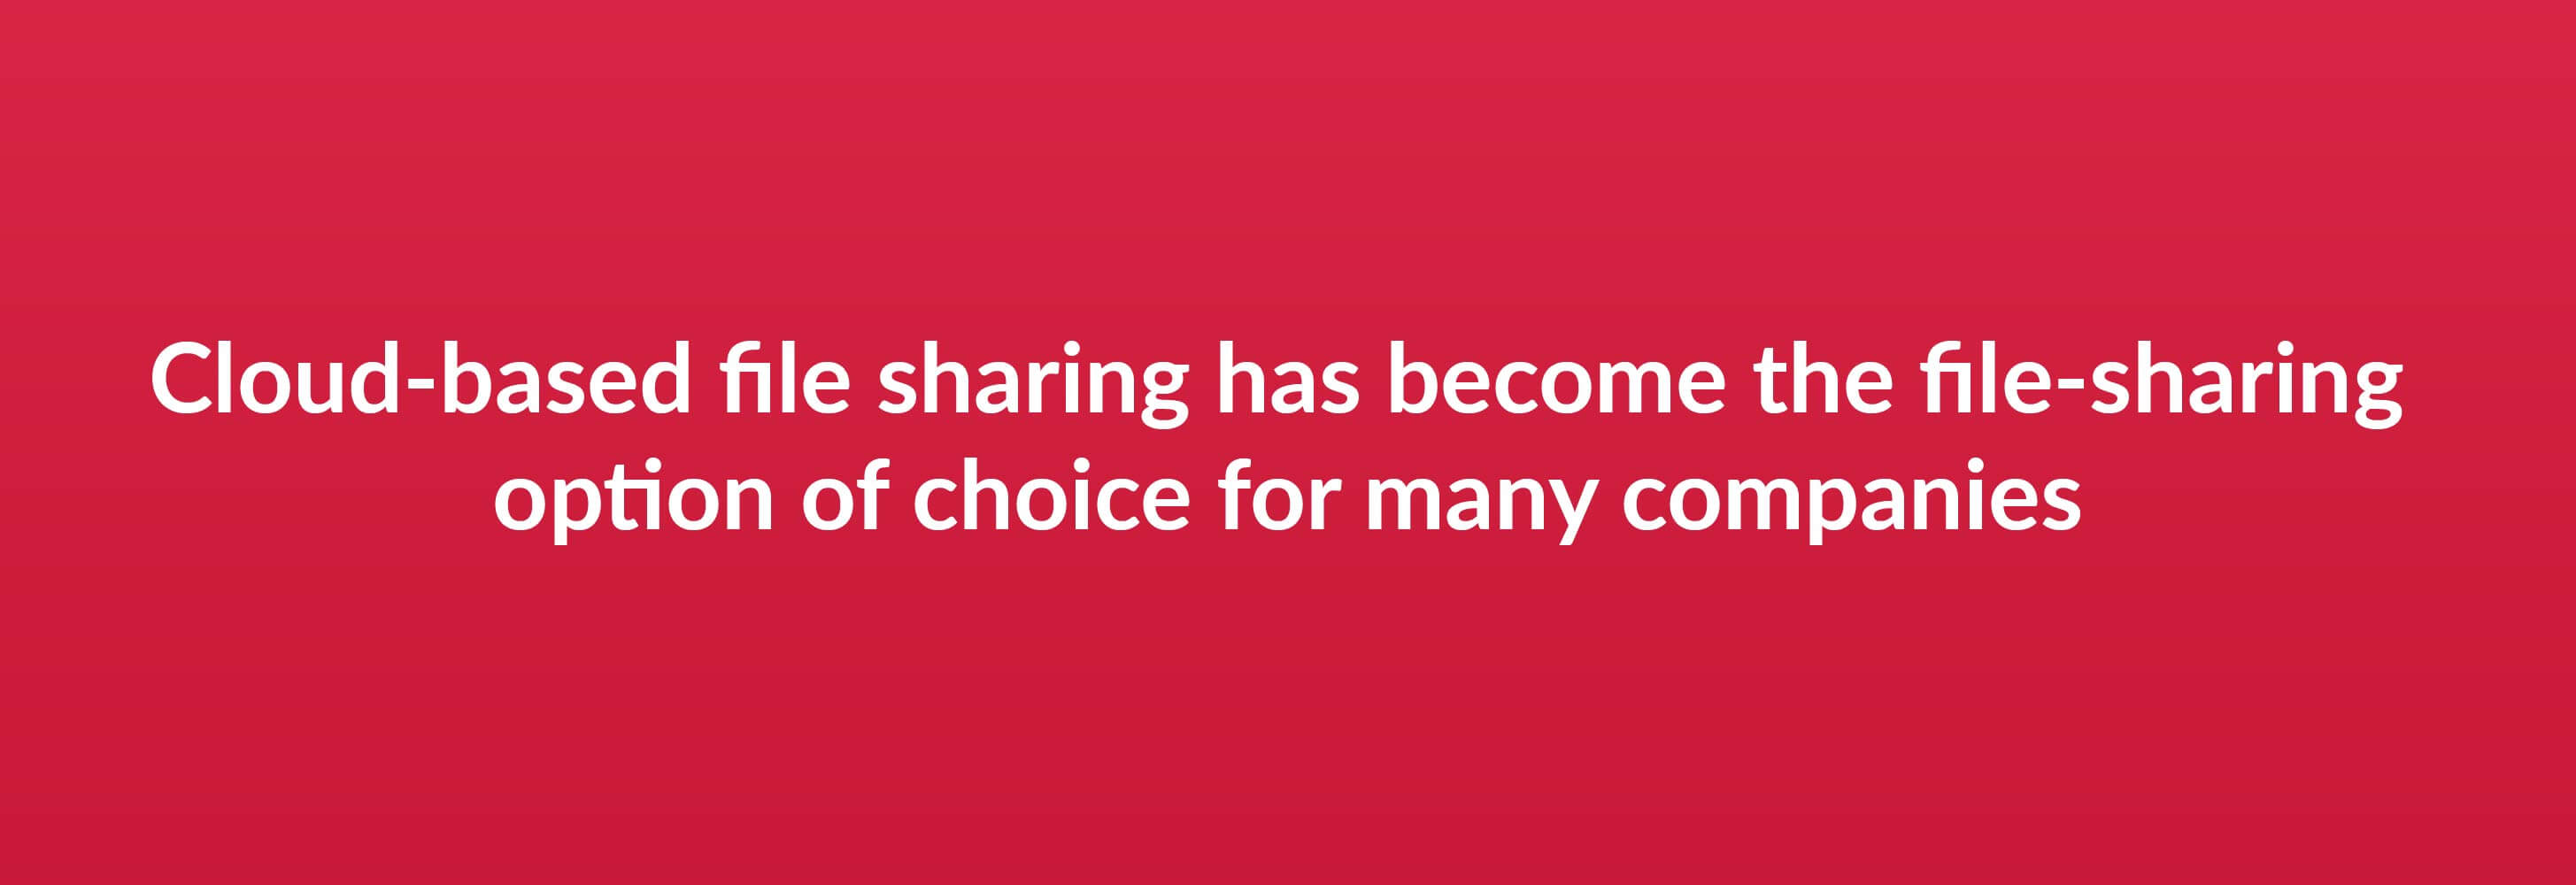 Cloud-based file sharing has become he file-sharing option of choice for many companies